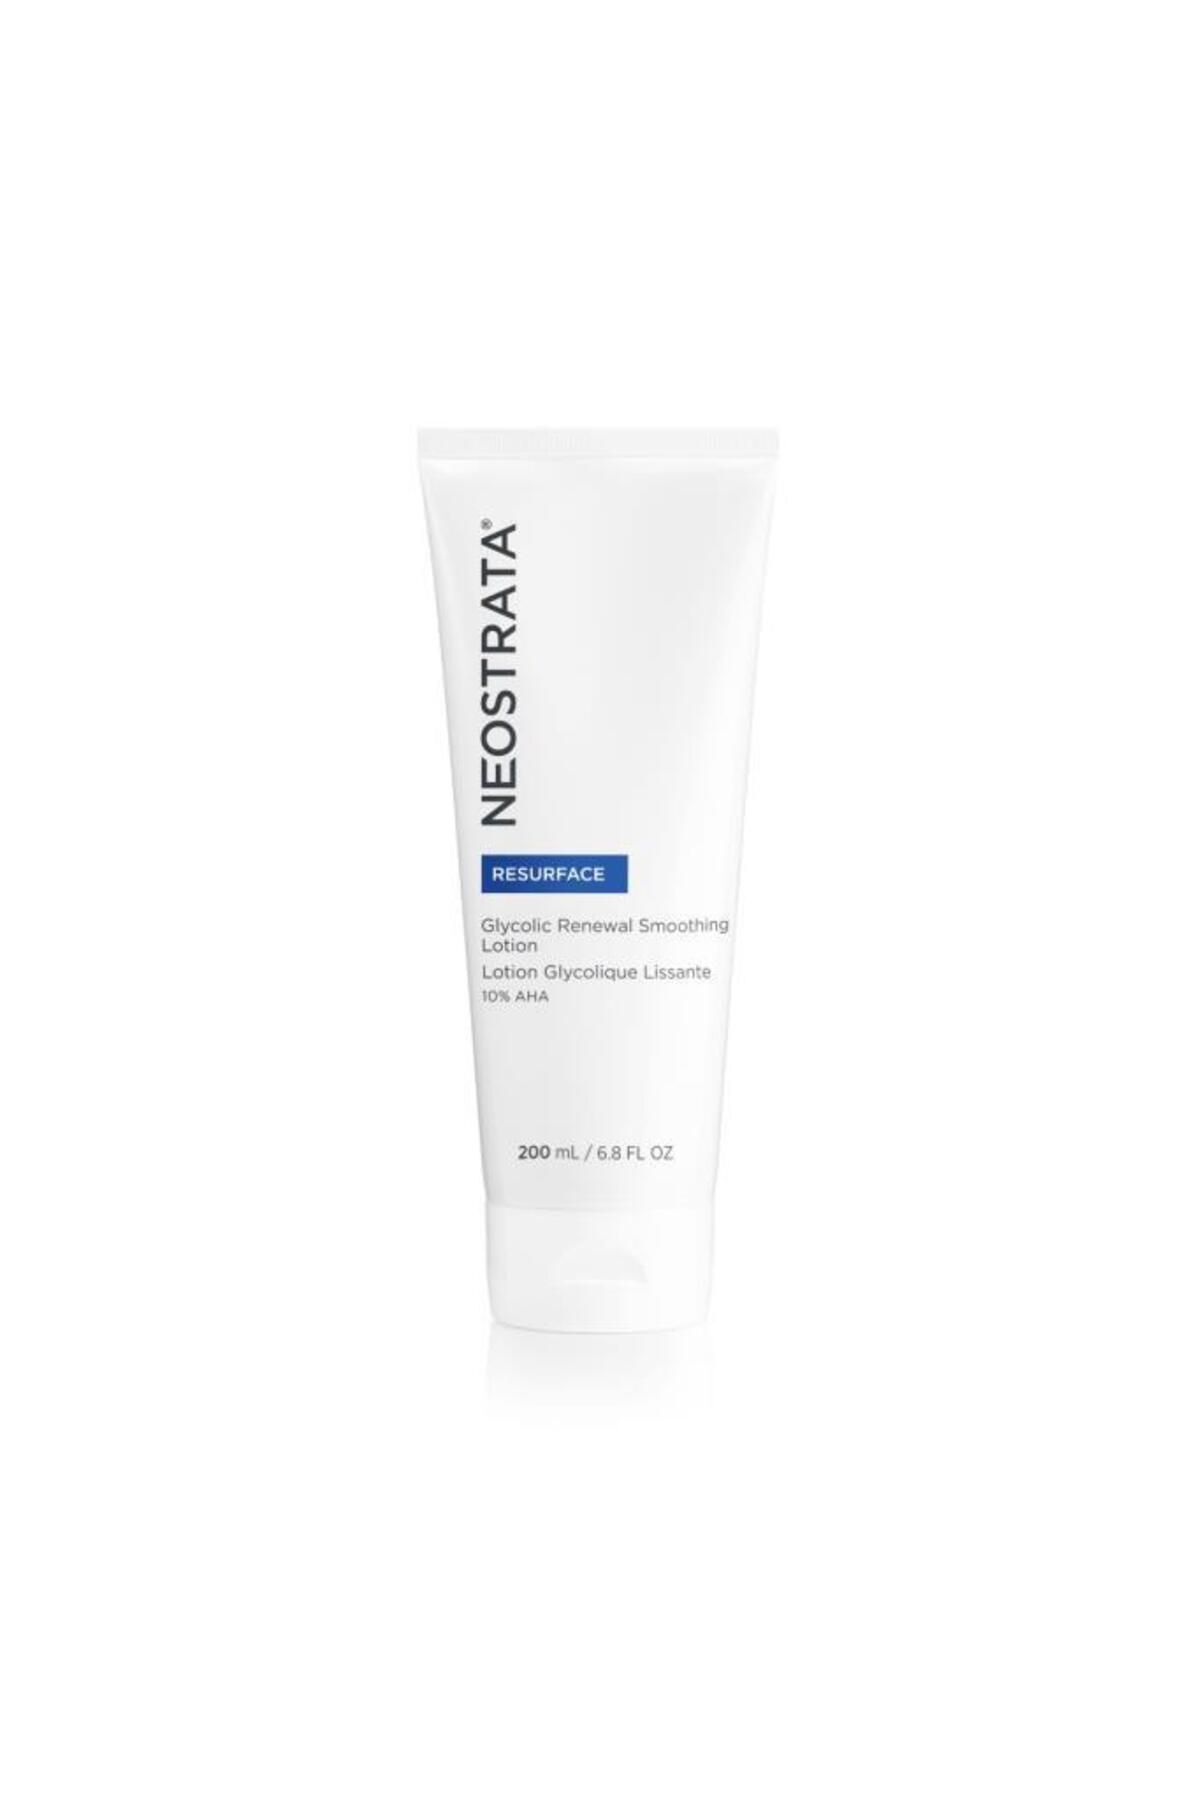 NeoStrata Resurface Wrinkle and Fine Line Reducing, Renewing & Smoothing Glycolic Lotion 200 ml PSSNS559